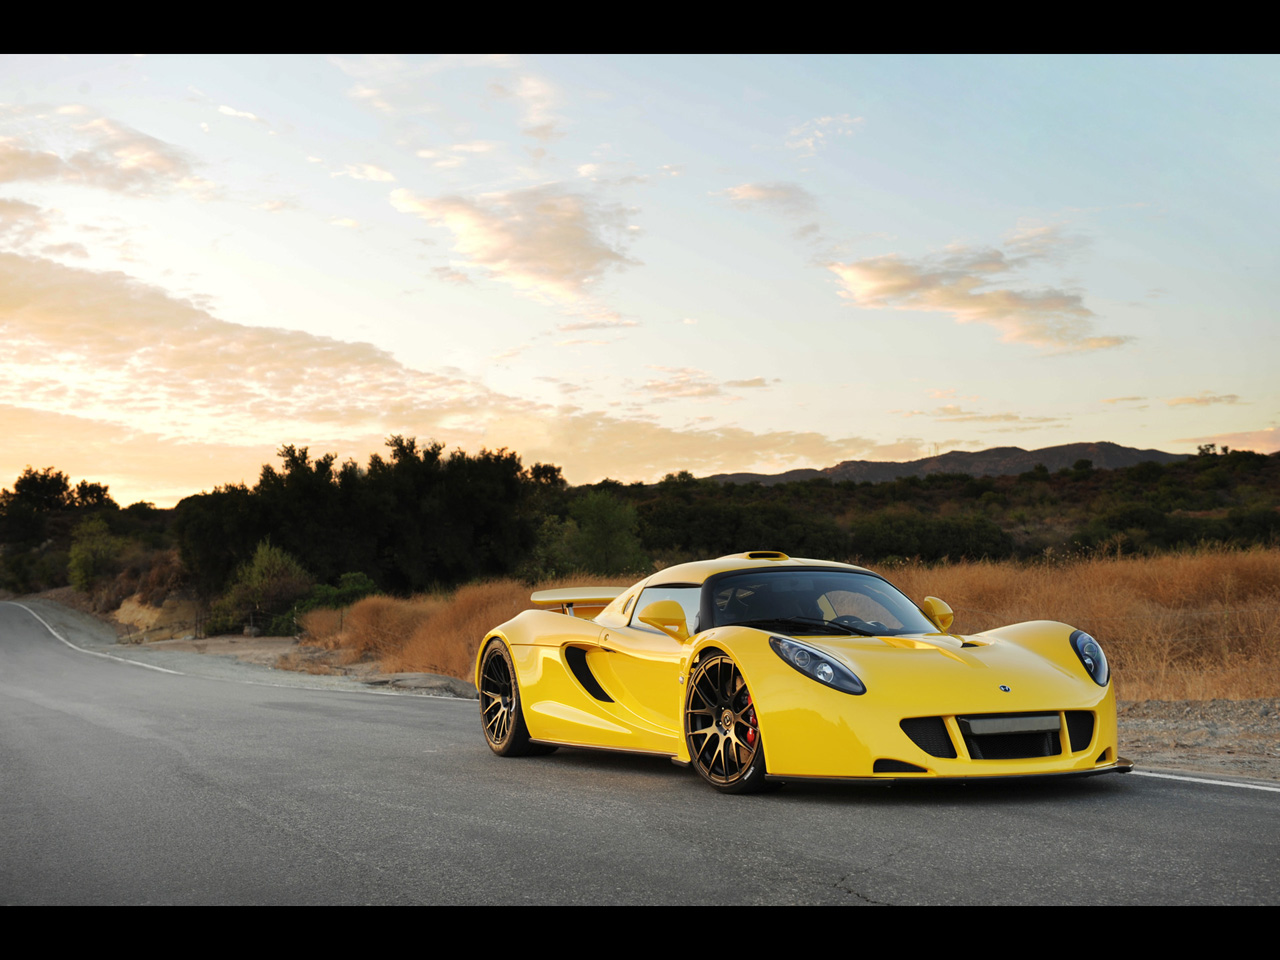 LD's Photo Blog - Pagina 11 2011-Hennessey-Venom-GT-Outdoor-Photoshoot-Front-Angle-2-1280x960